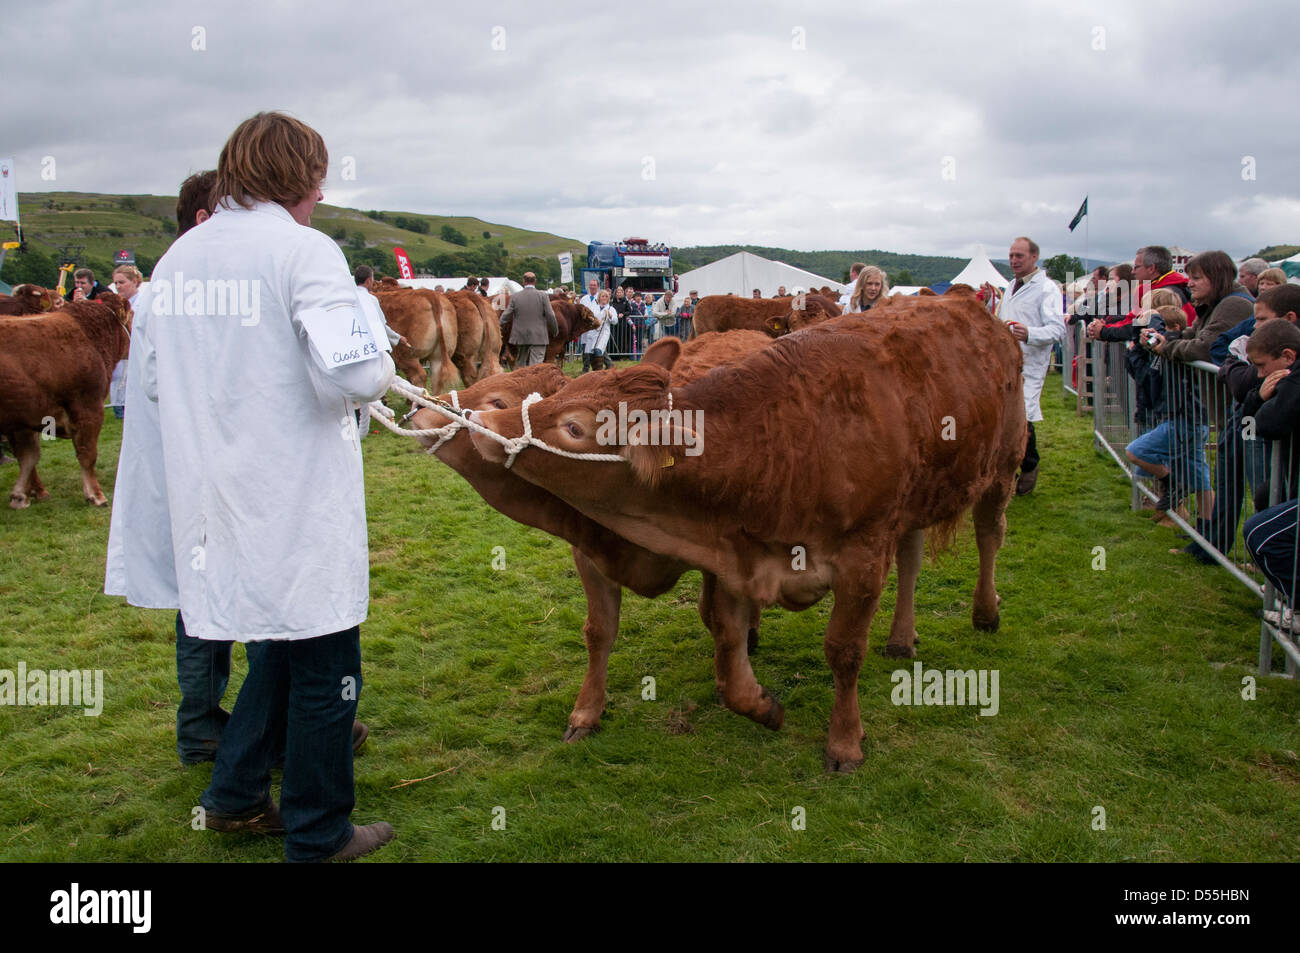 Handlers with pair of young limousin cattle competitors standing in parade ring - Kilnsey Agricultural Show showground, Yorkshire Dales, England, UK. Stock Photo